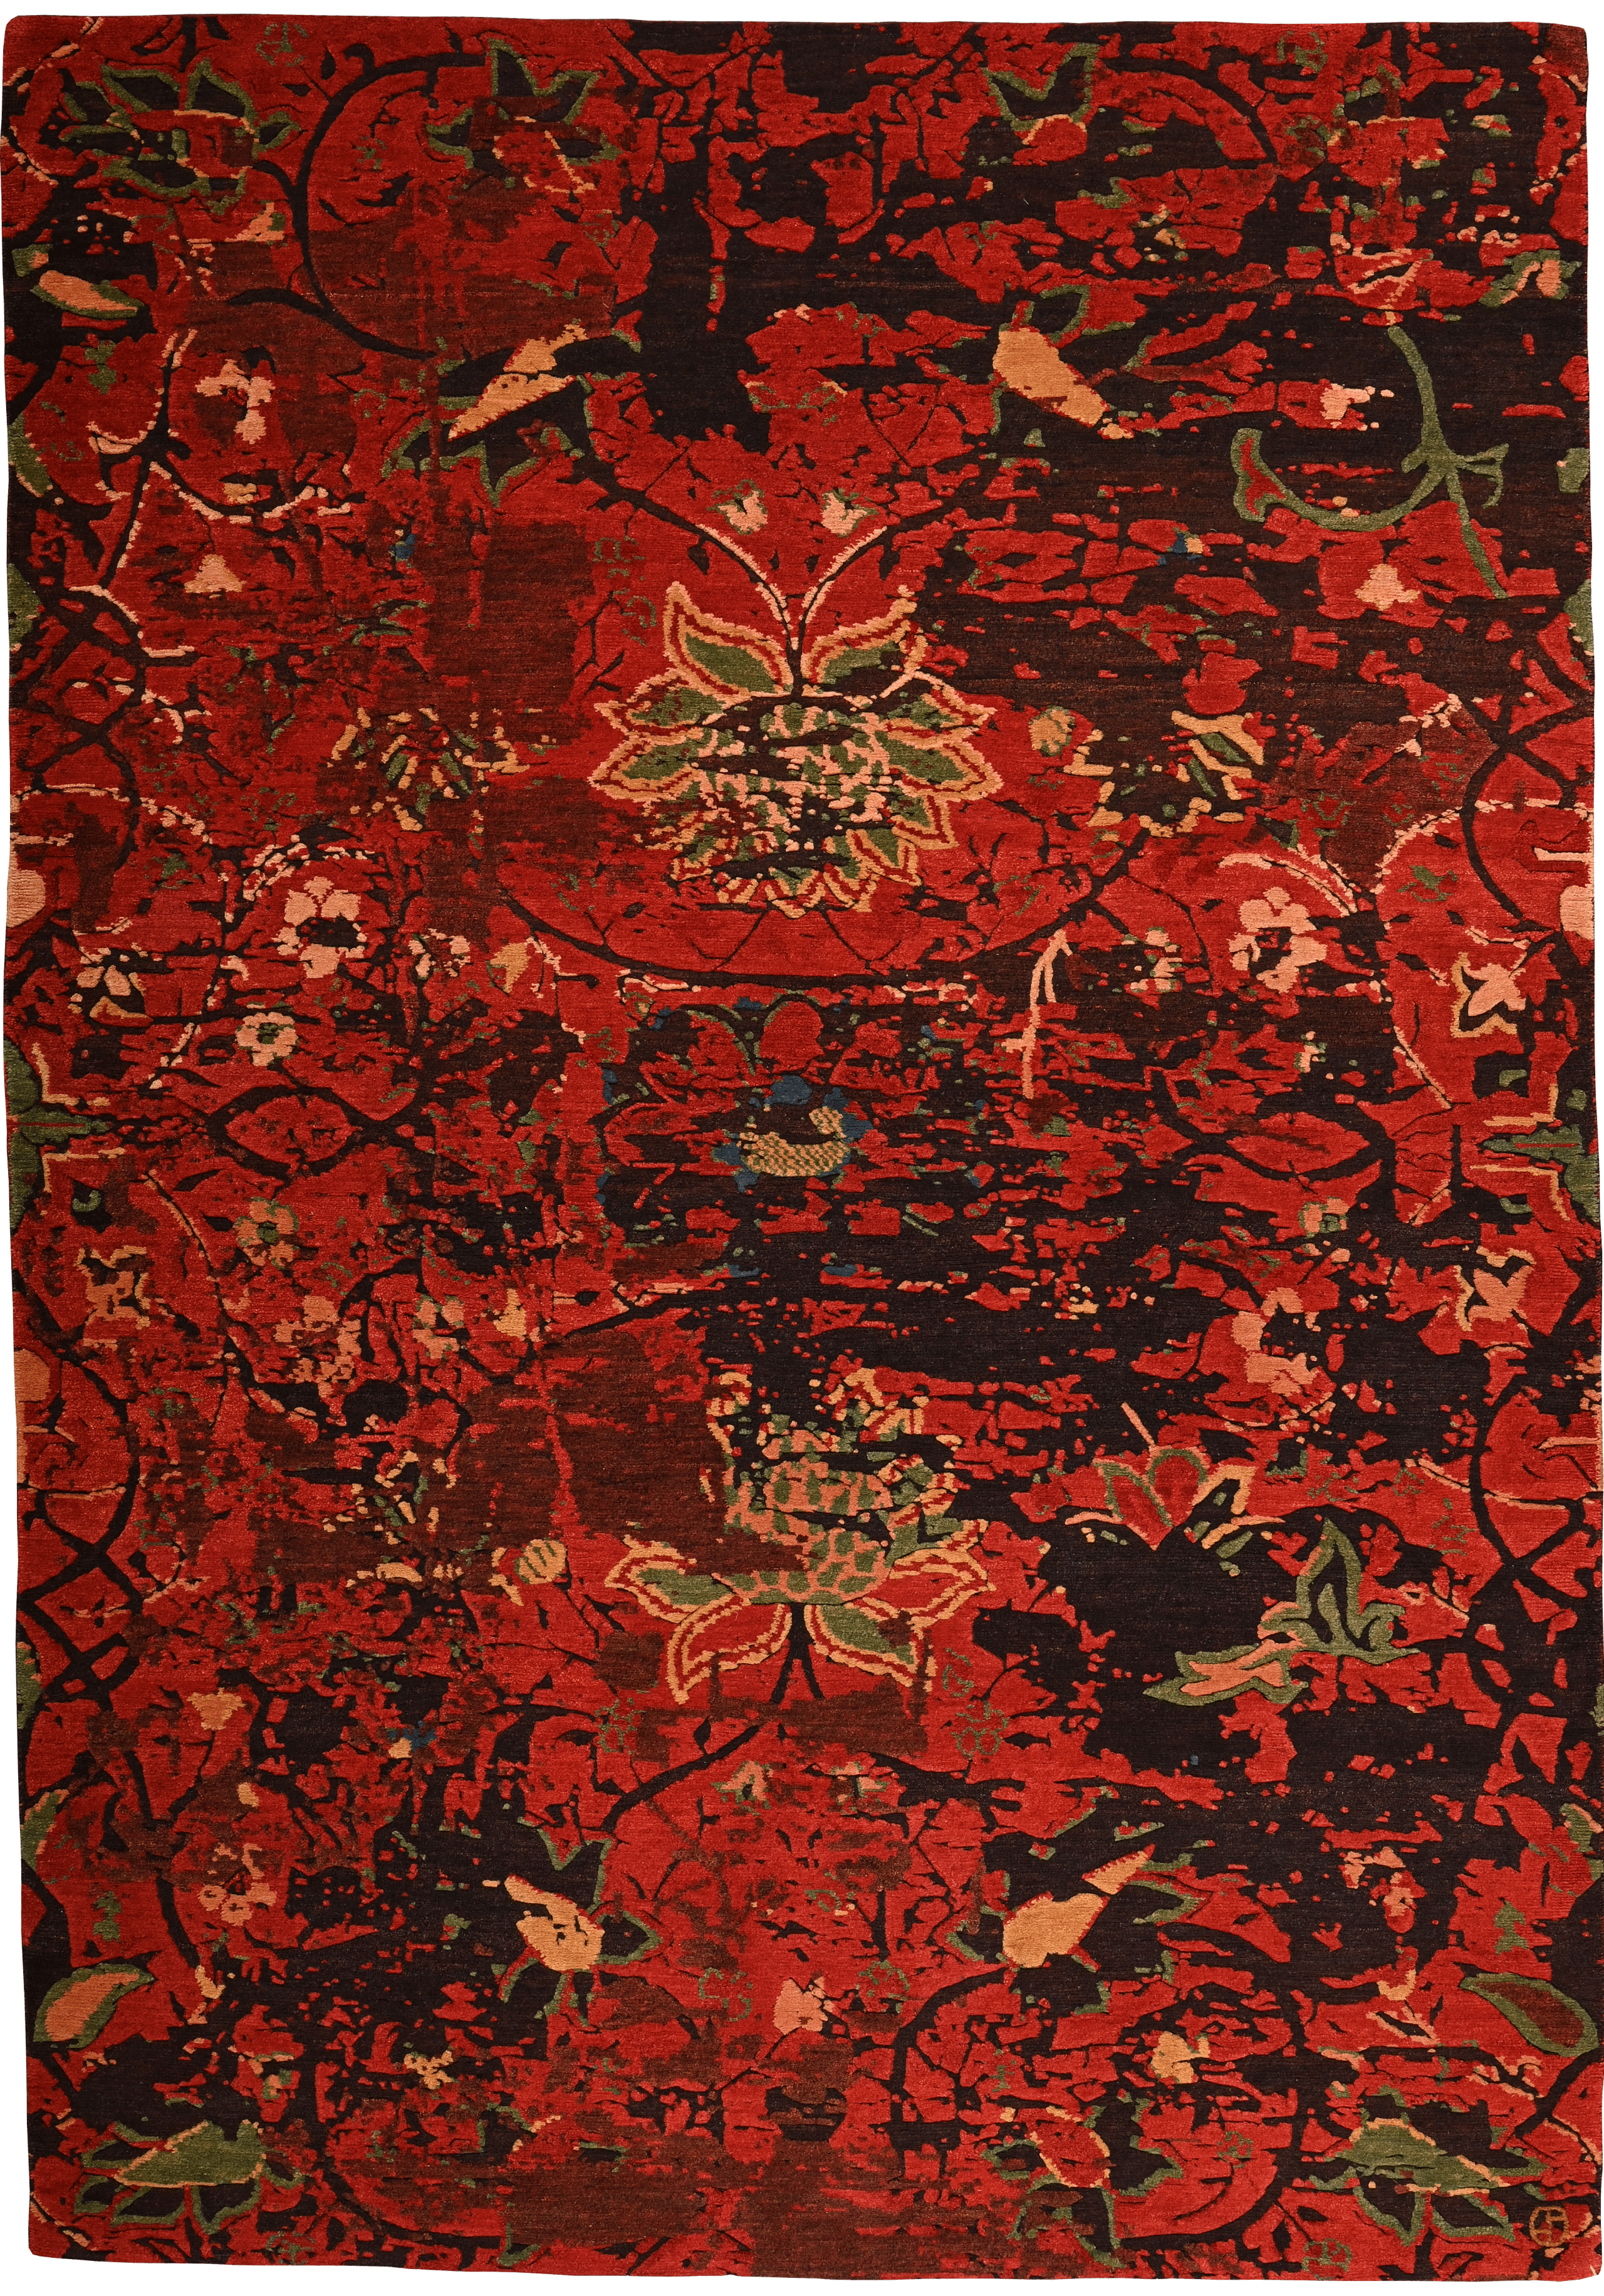 Geba carpet "Wangchuk" with floral pattern, tibetan motives, in red-brown-green-beige, relief cut, from Nepal, 100 knot, made of vegetable dyed sheep's wool - product picture - Geba carpet